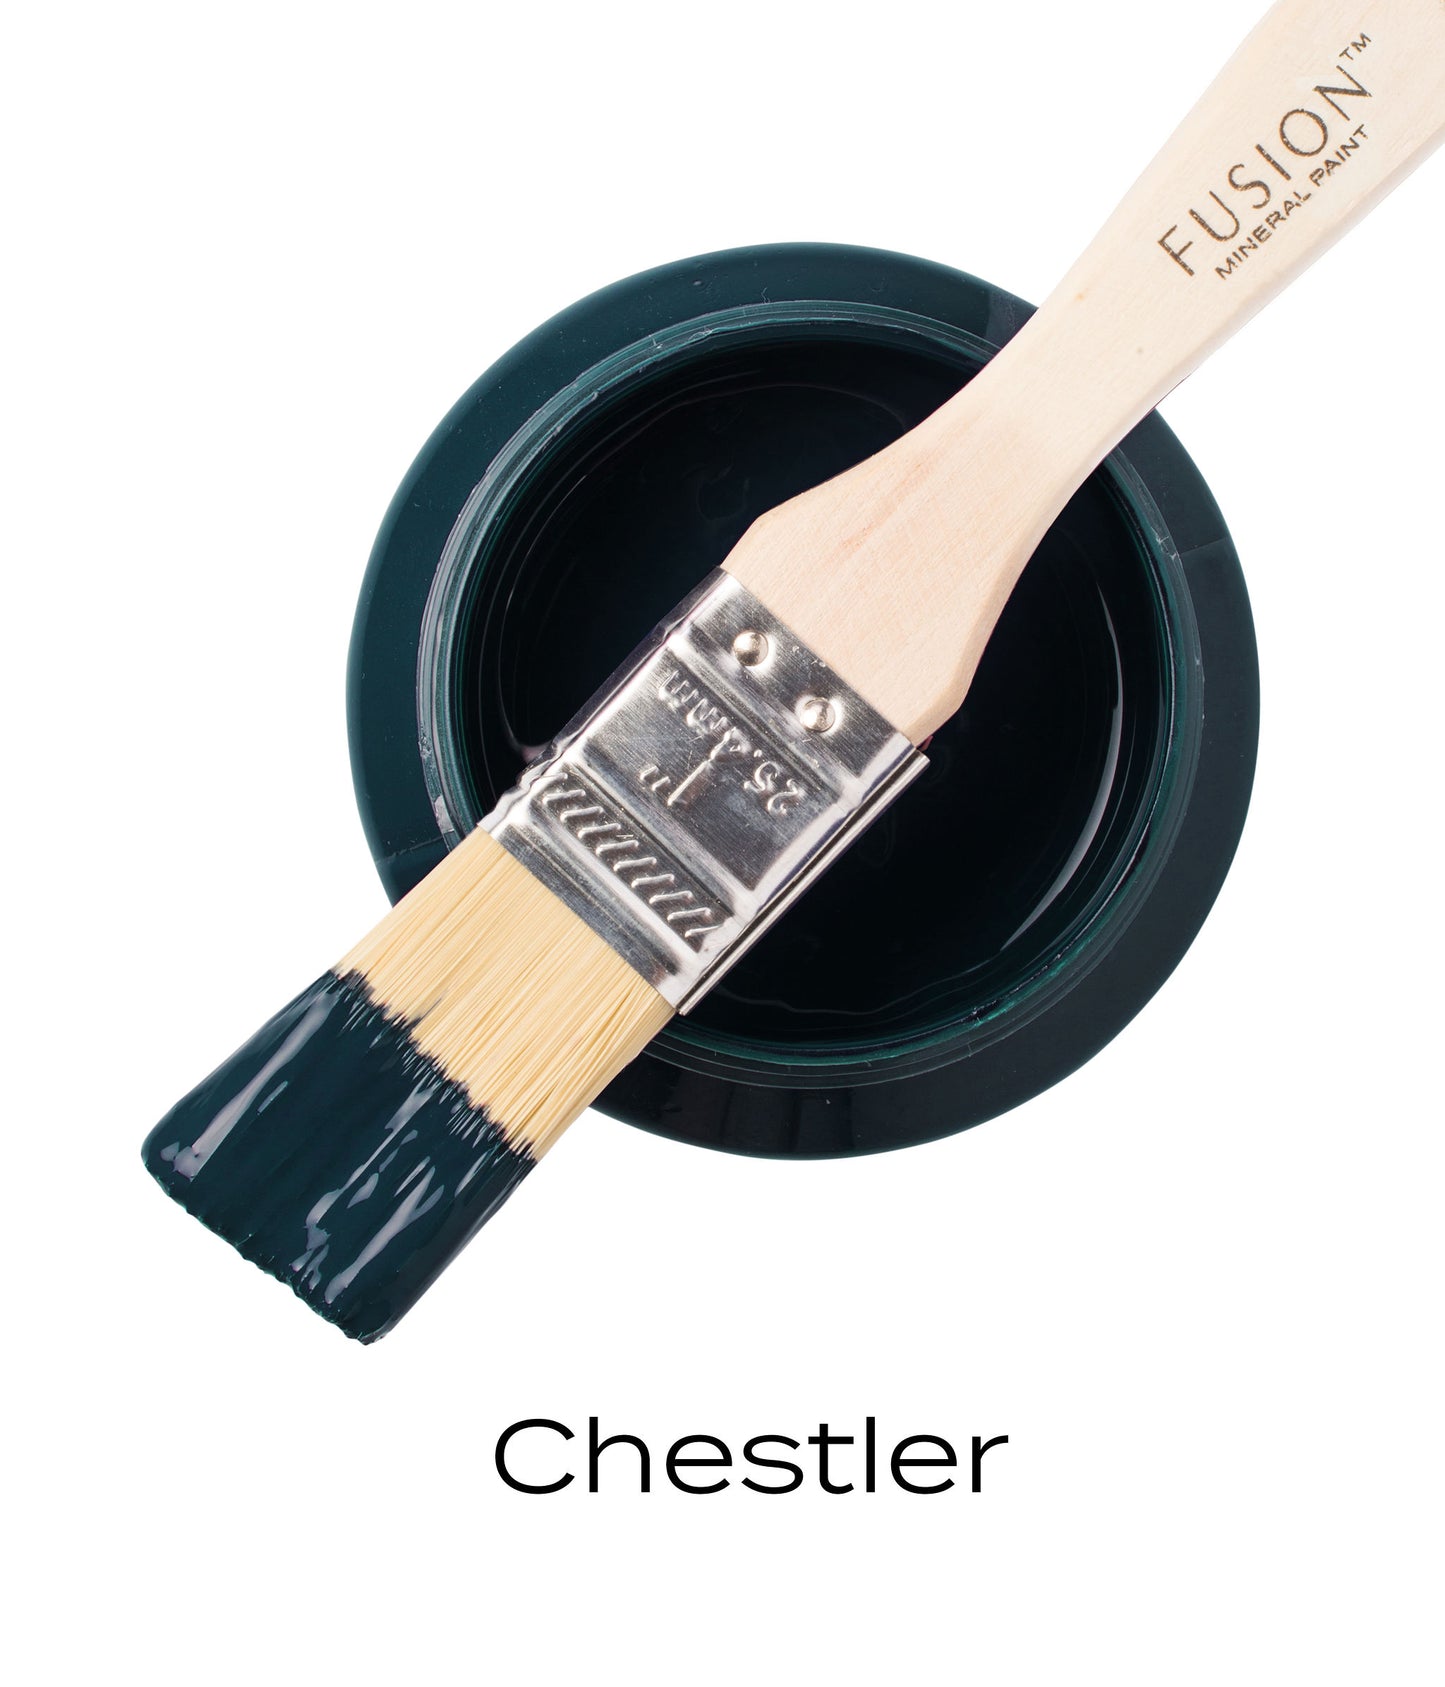 Chestler - Fusion Mineral Paint